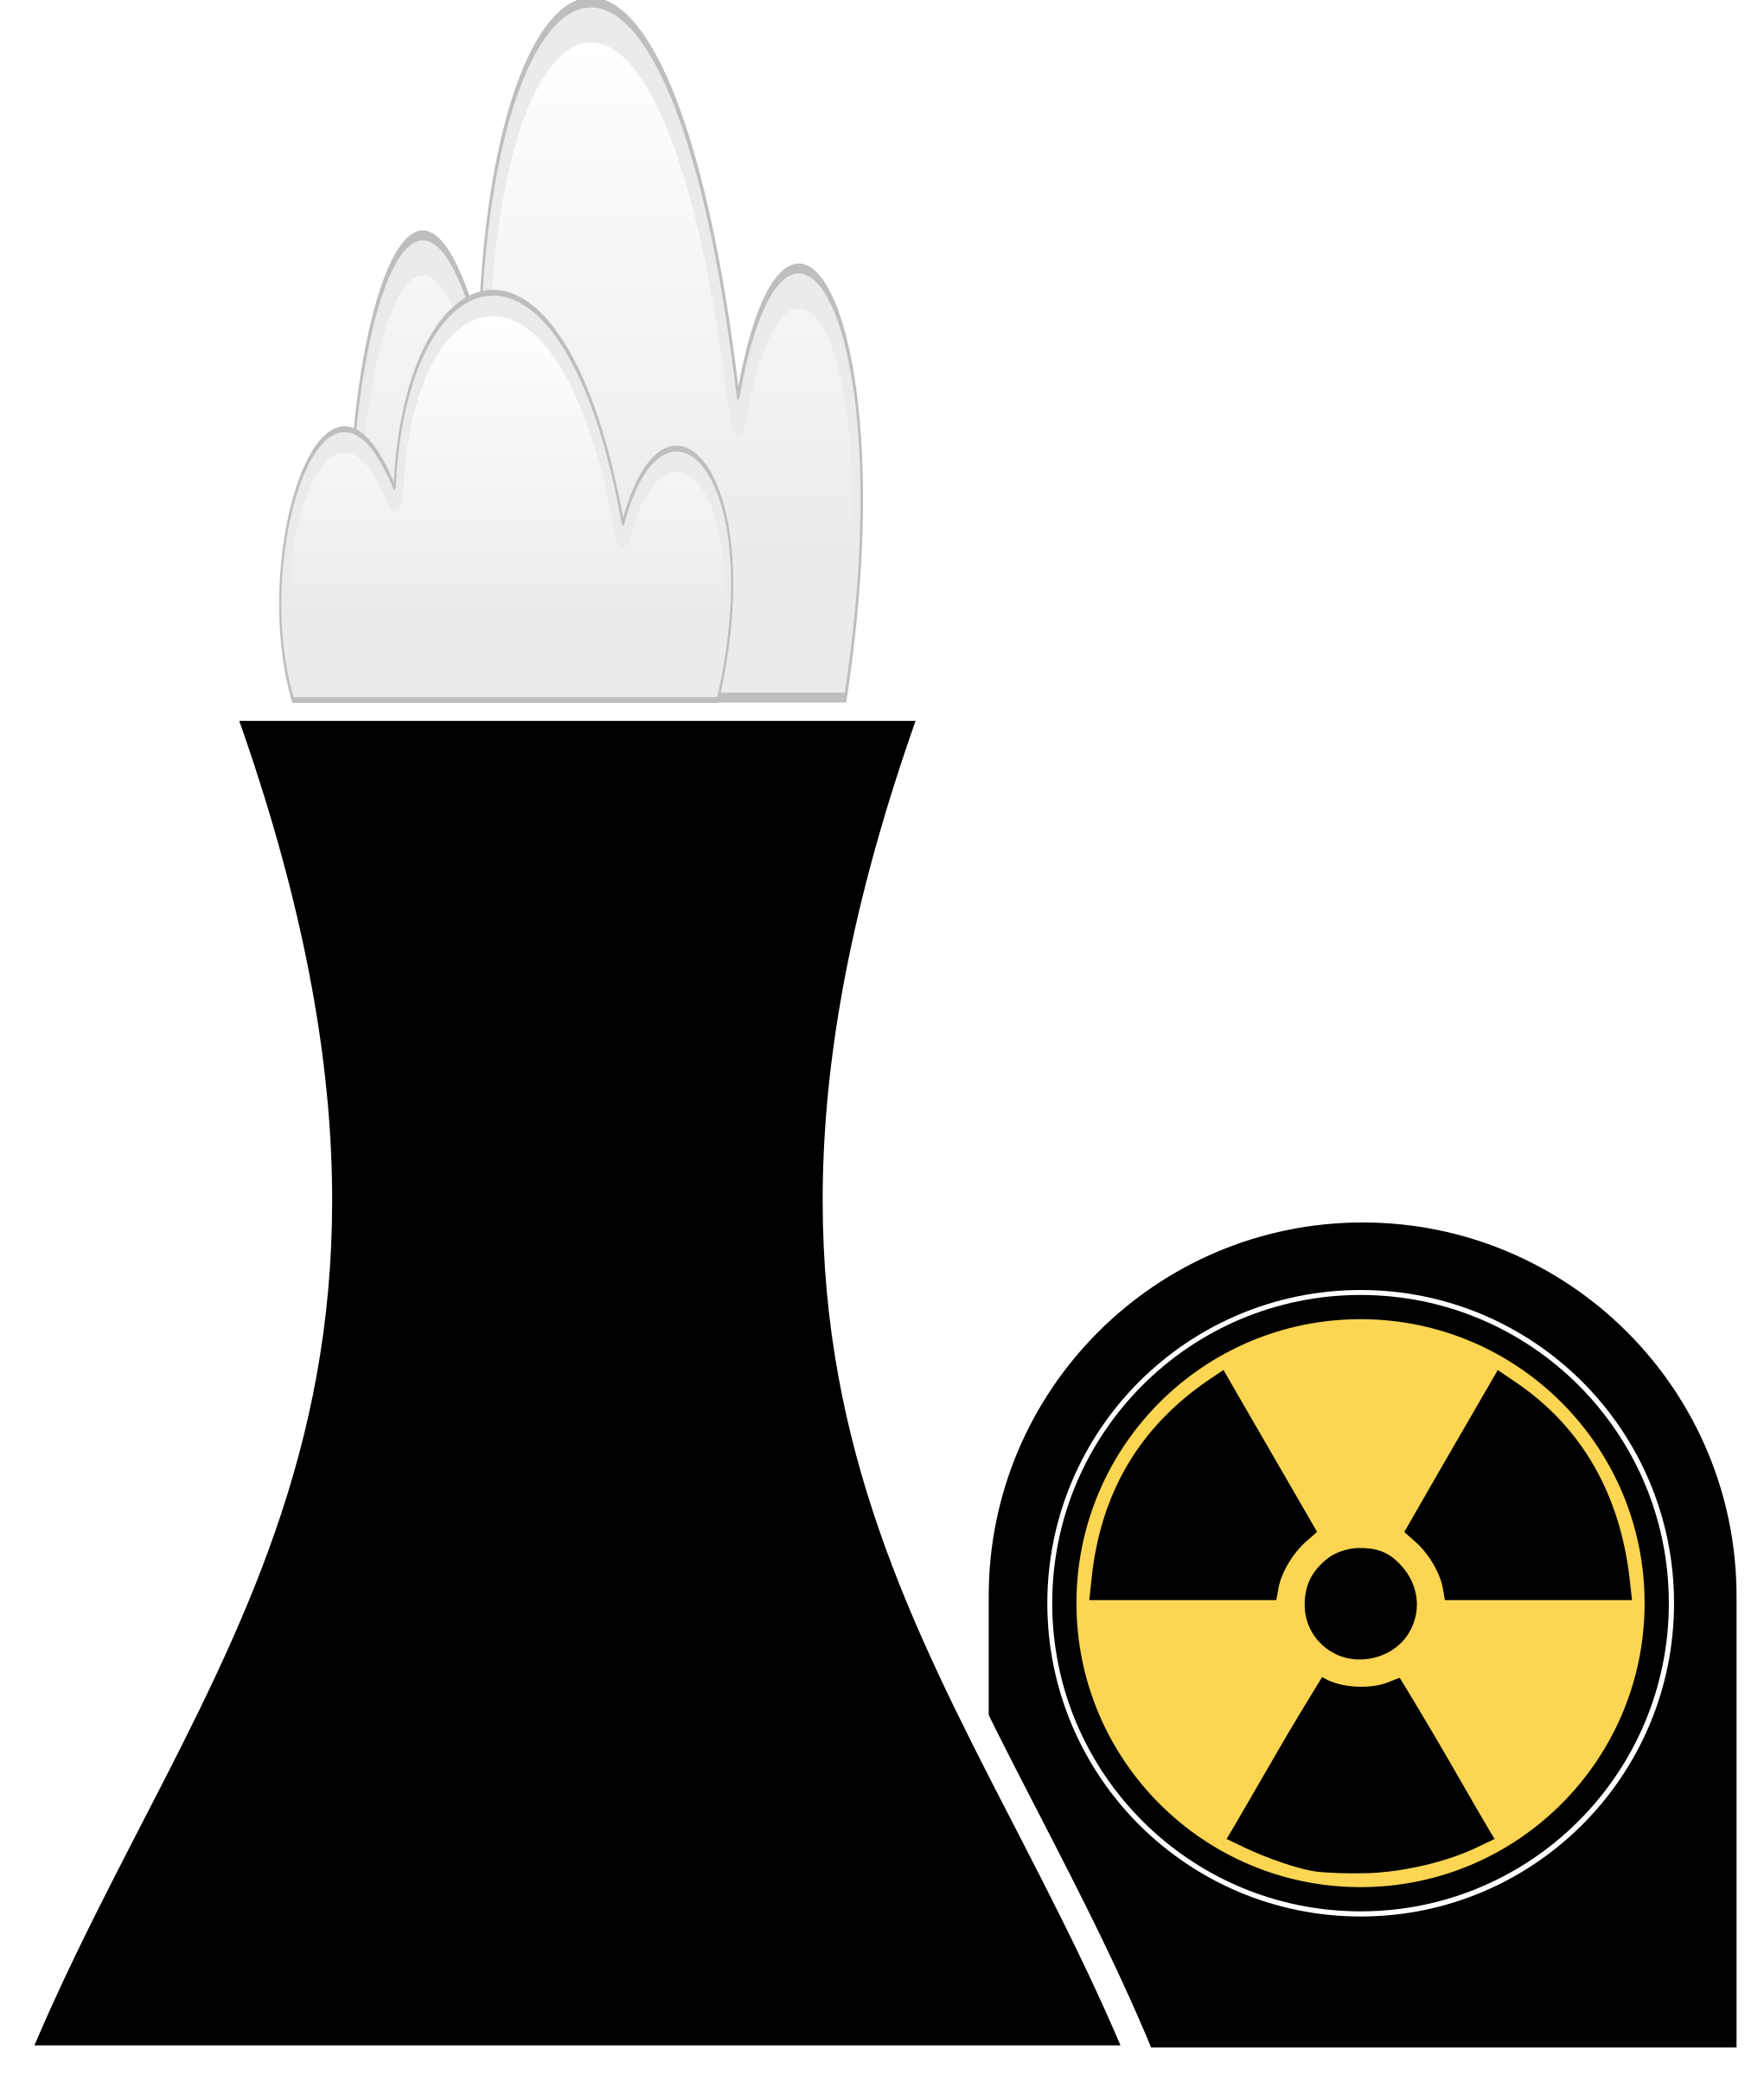 This Free Icons Png Design Of Nuclear Plant